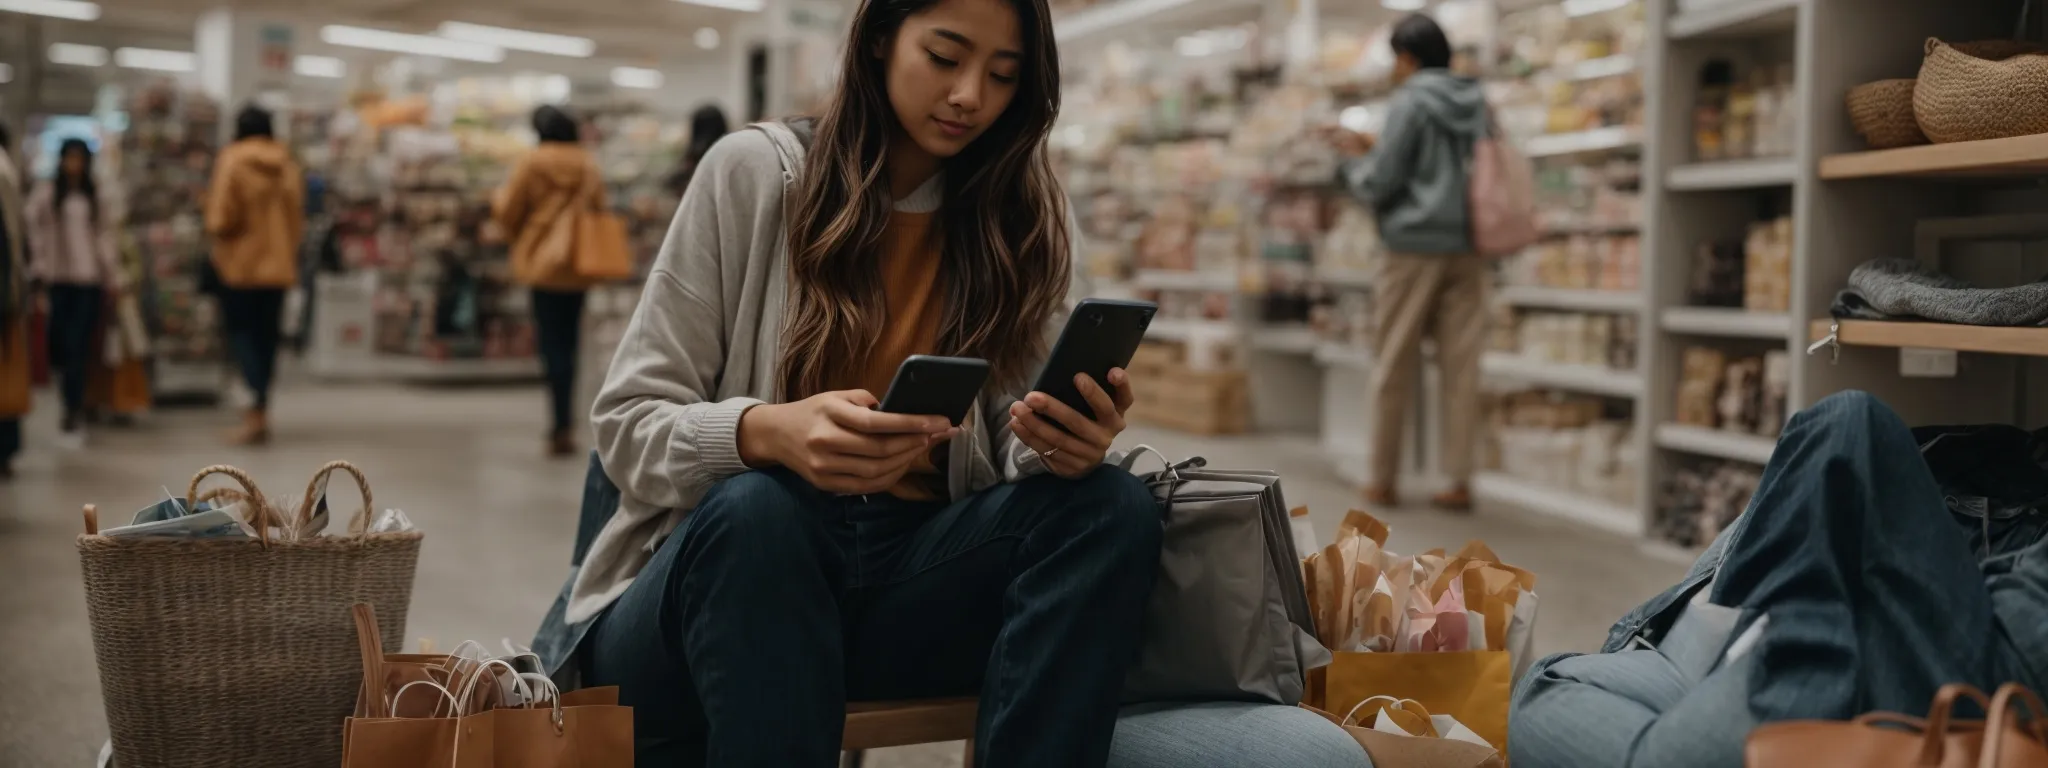 a person sitting comfortably while shopping on their smartphone, immersed in a user-friendly mobile website.